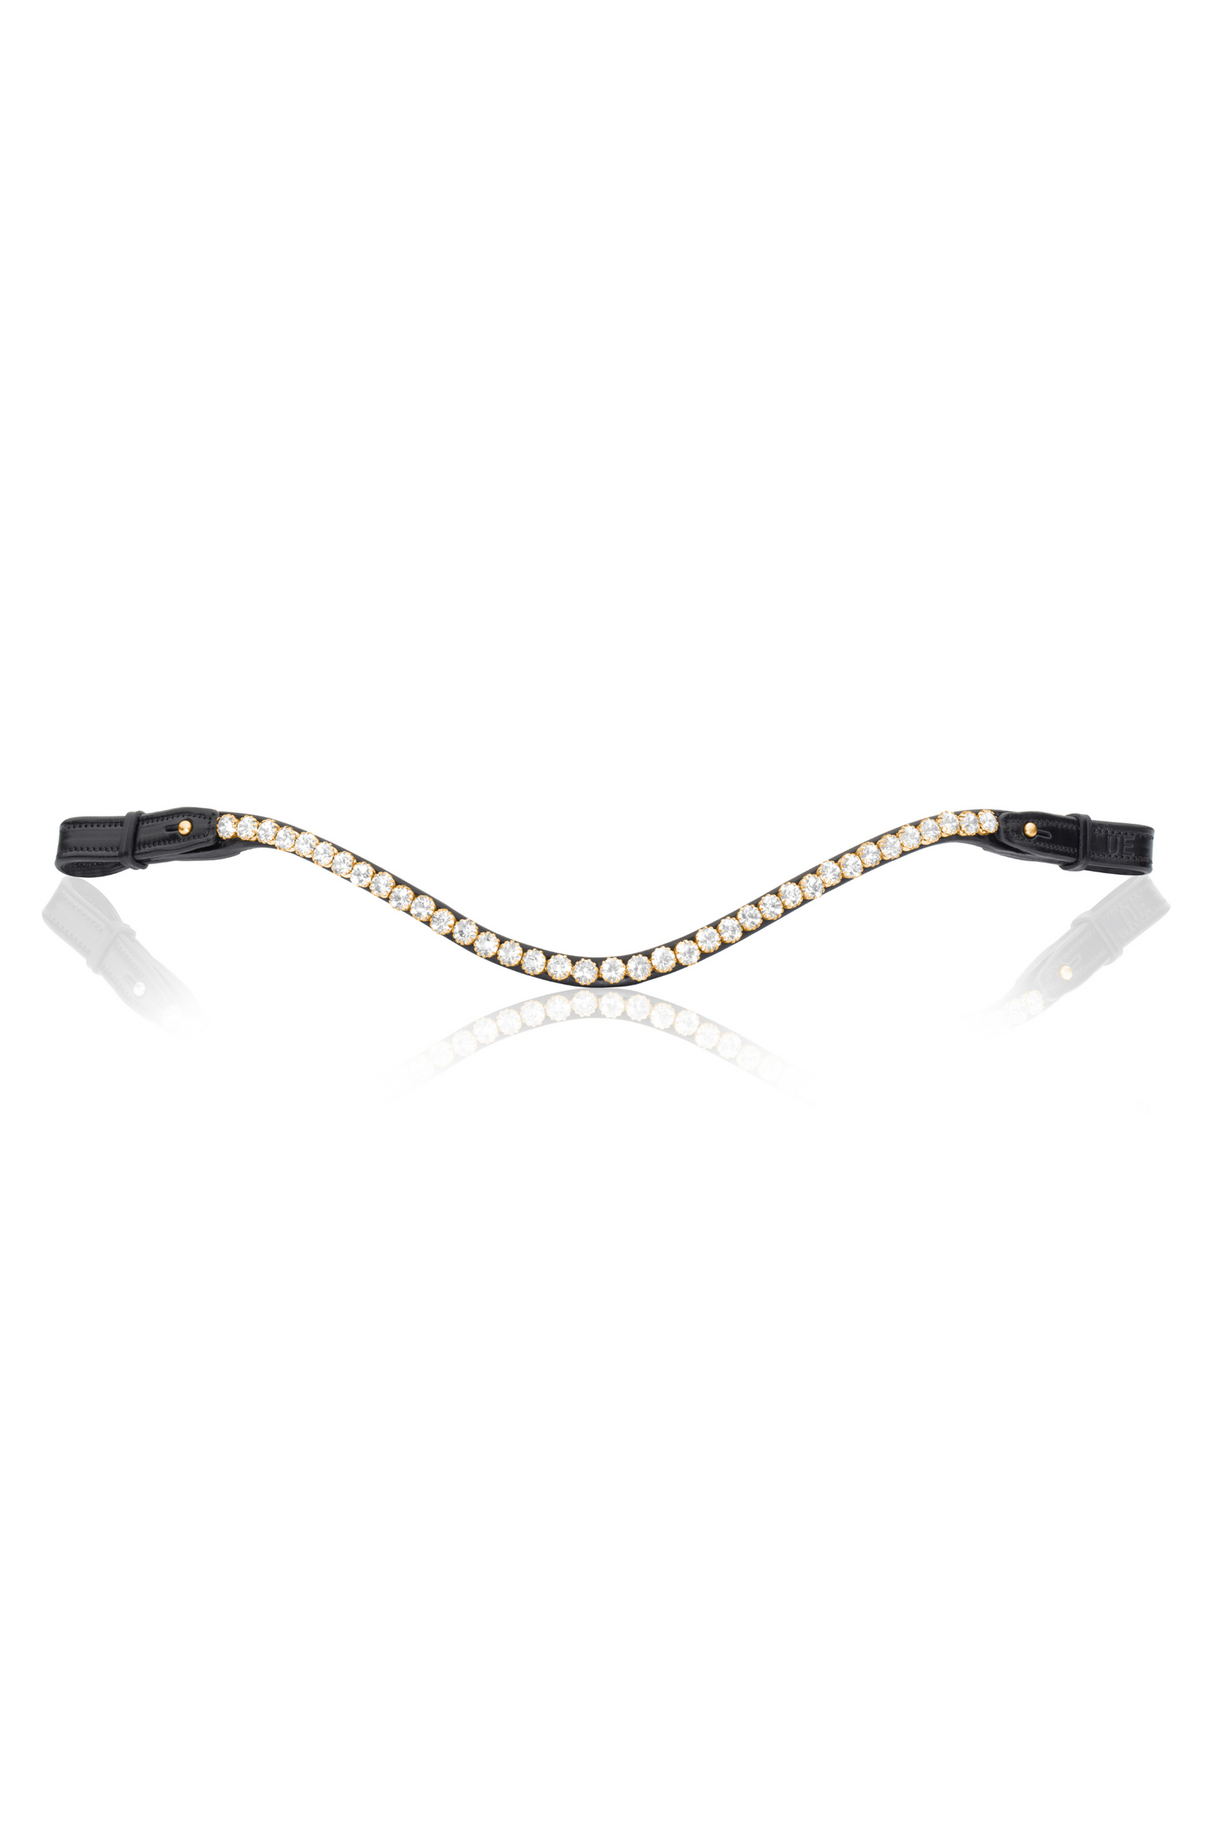 IN STOCK - Utzon Equestrian Elegant Browband Clear